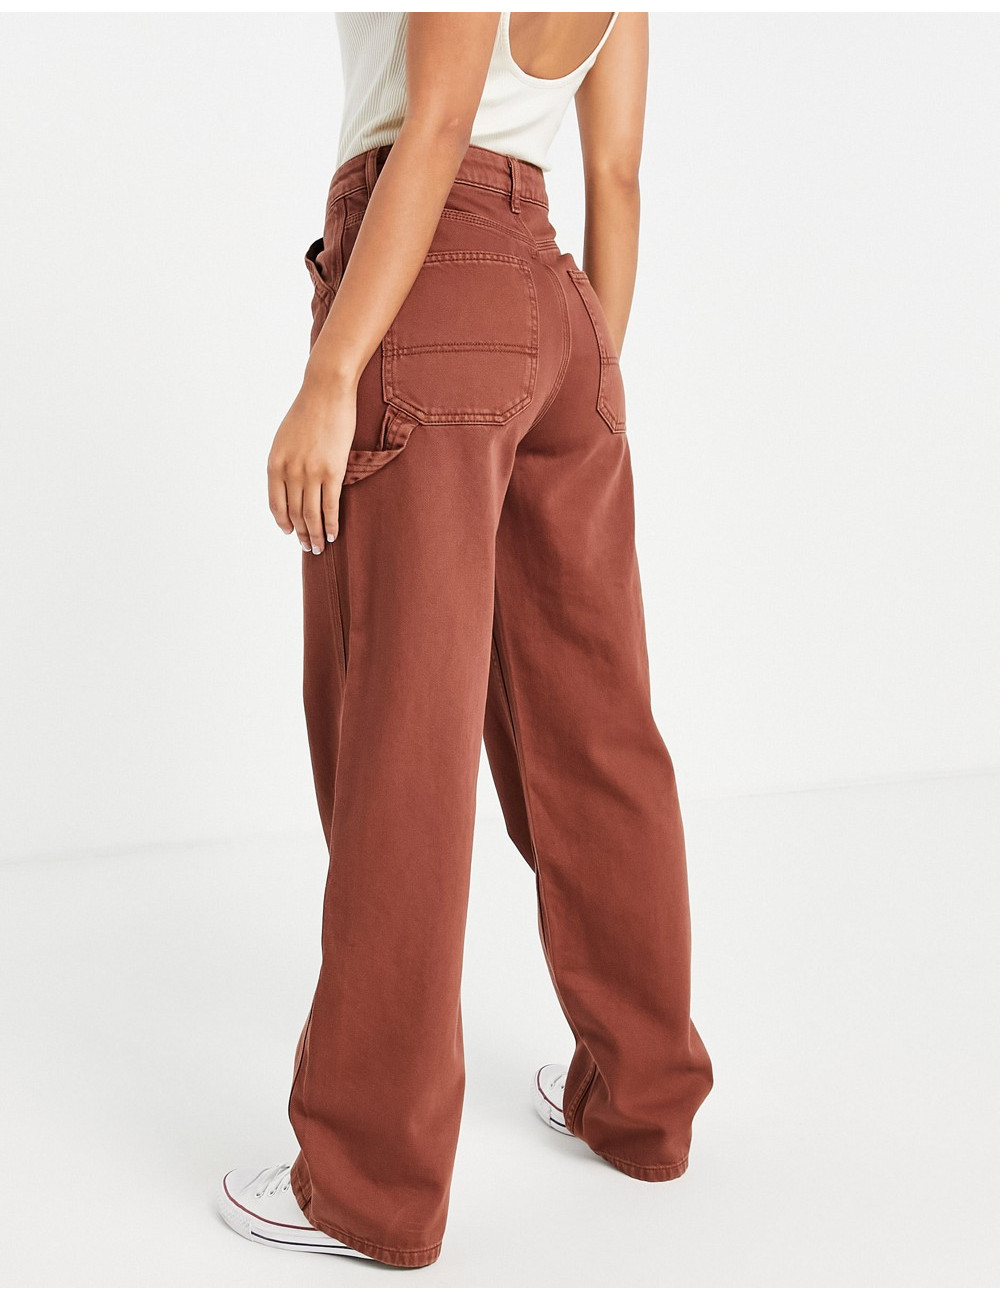 Topshop oversized mom jeans...